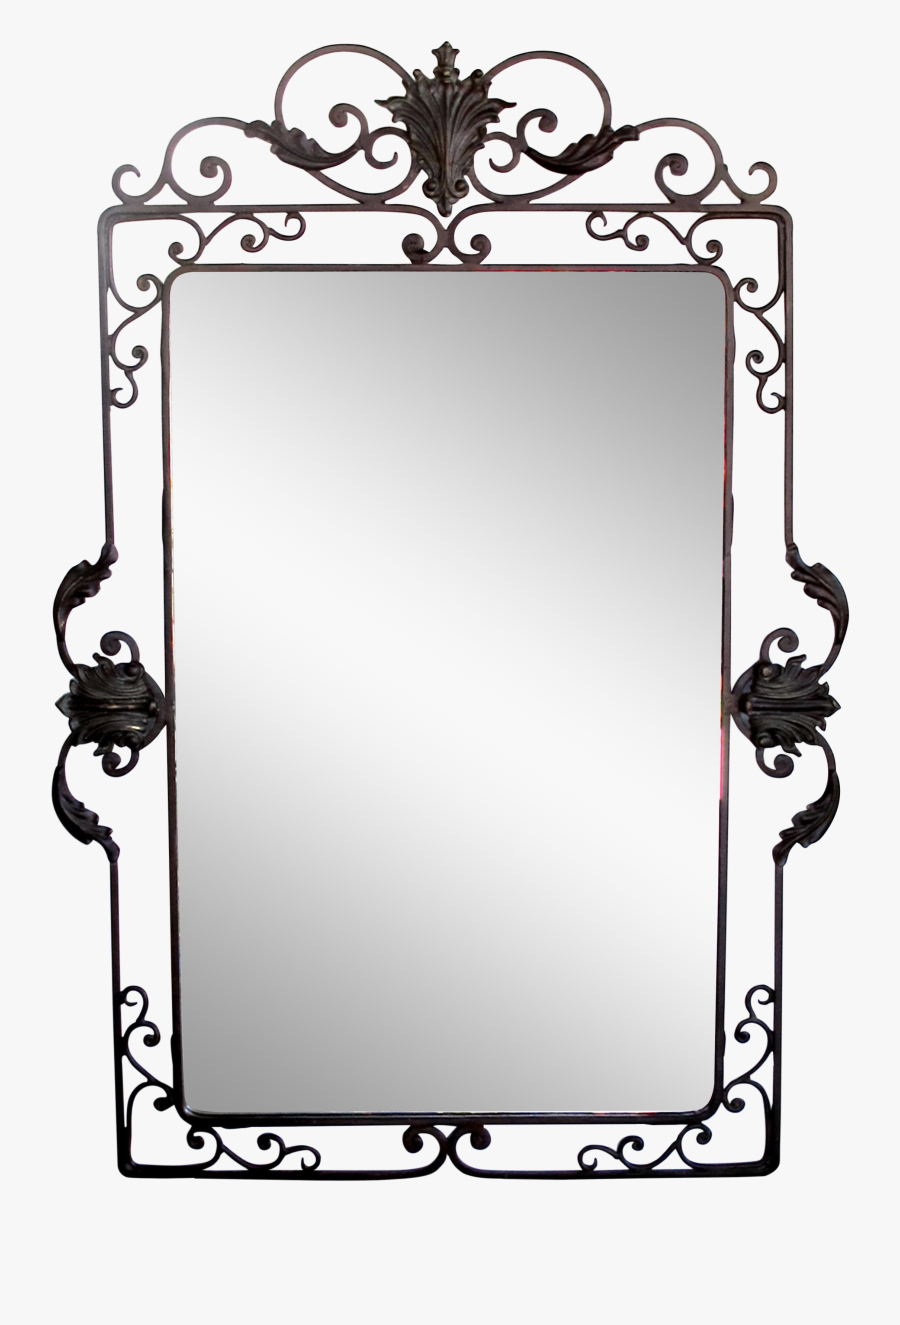 Fine A Well Crafted, Transparent Clipart